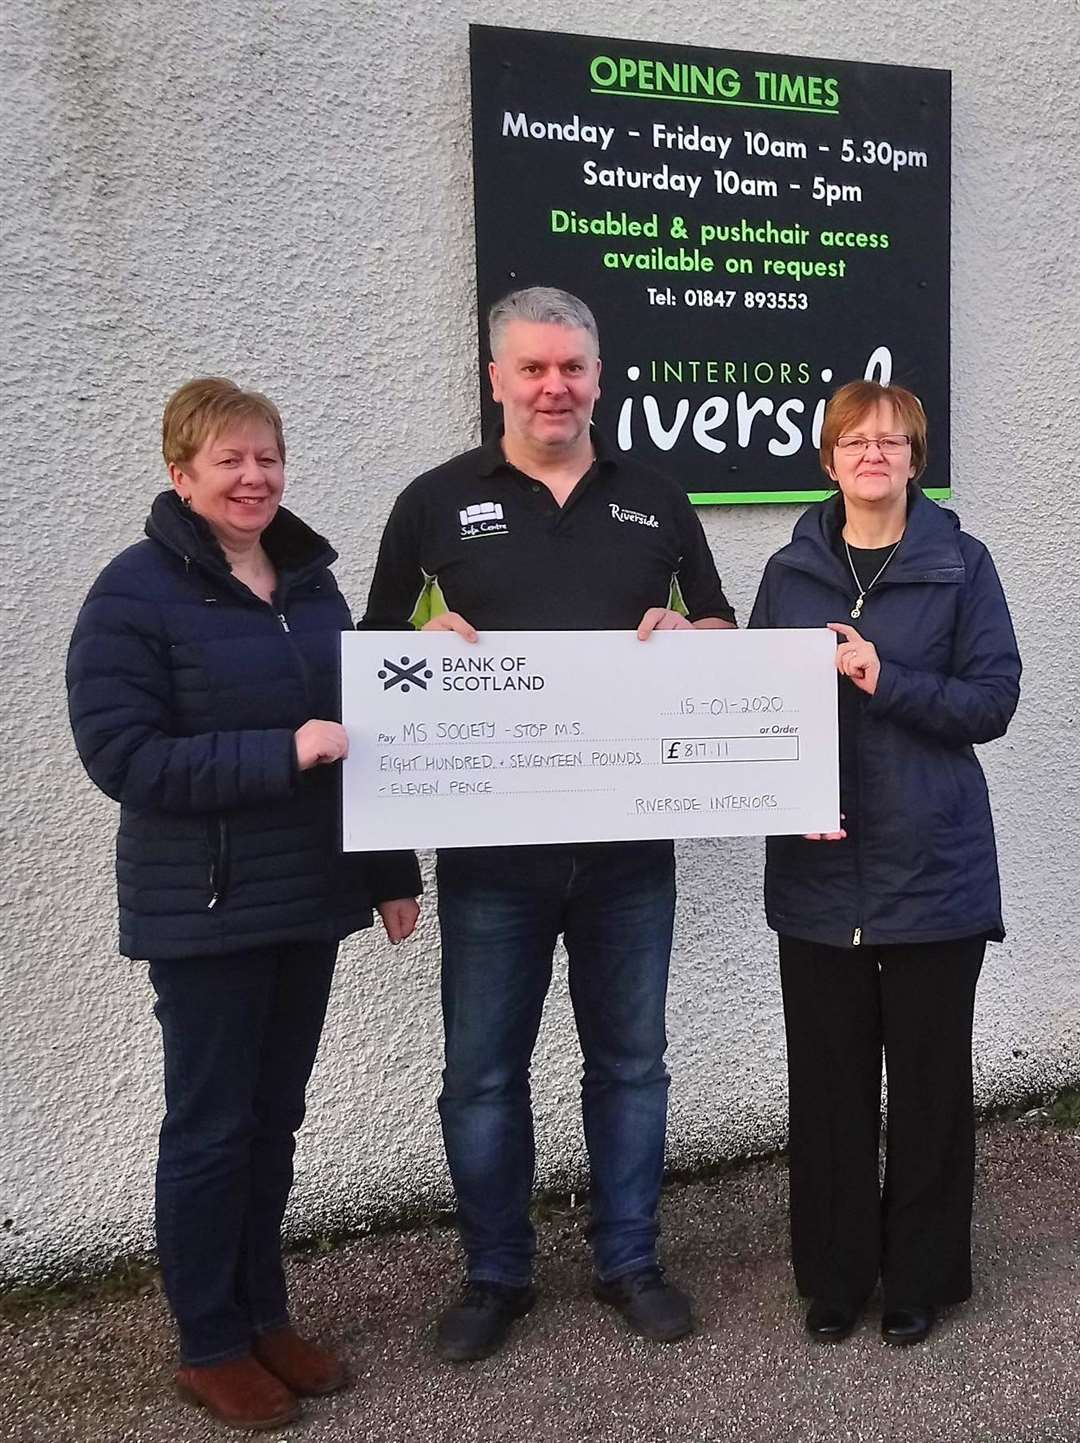 Receiving the cheque from Carl Swanson, proprietor of Riverside Interiors, are MS Society Caithness Group volunteers Sandra Macdonald (left) and Catherine Cowan.